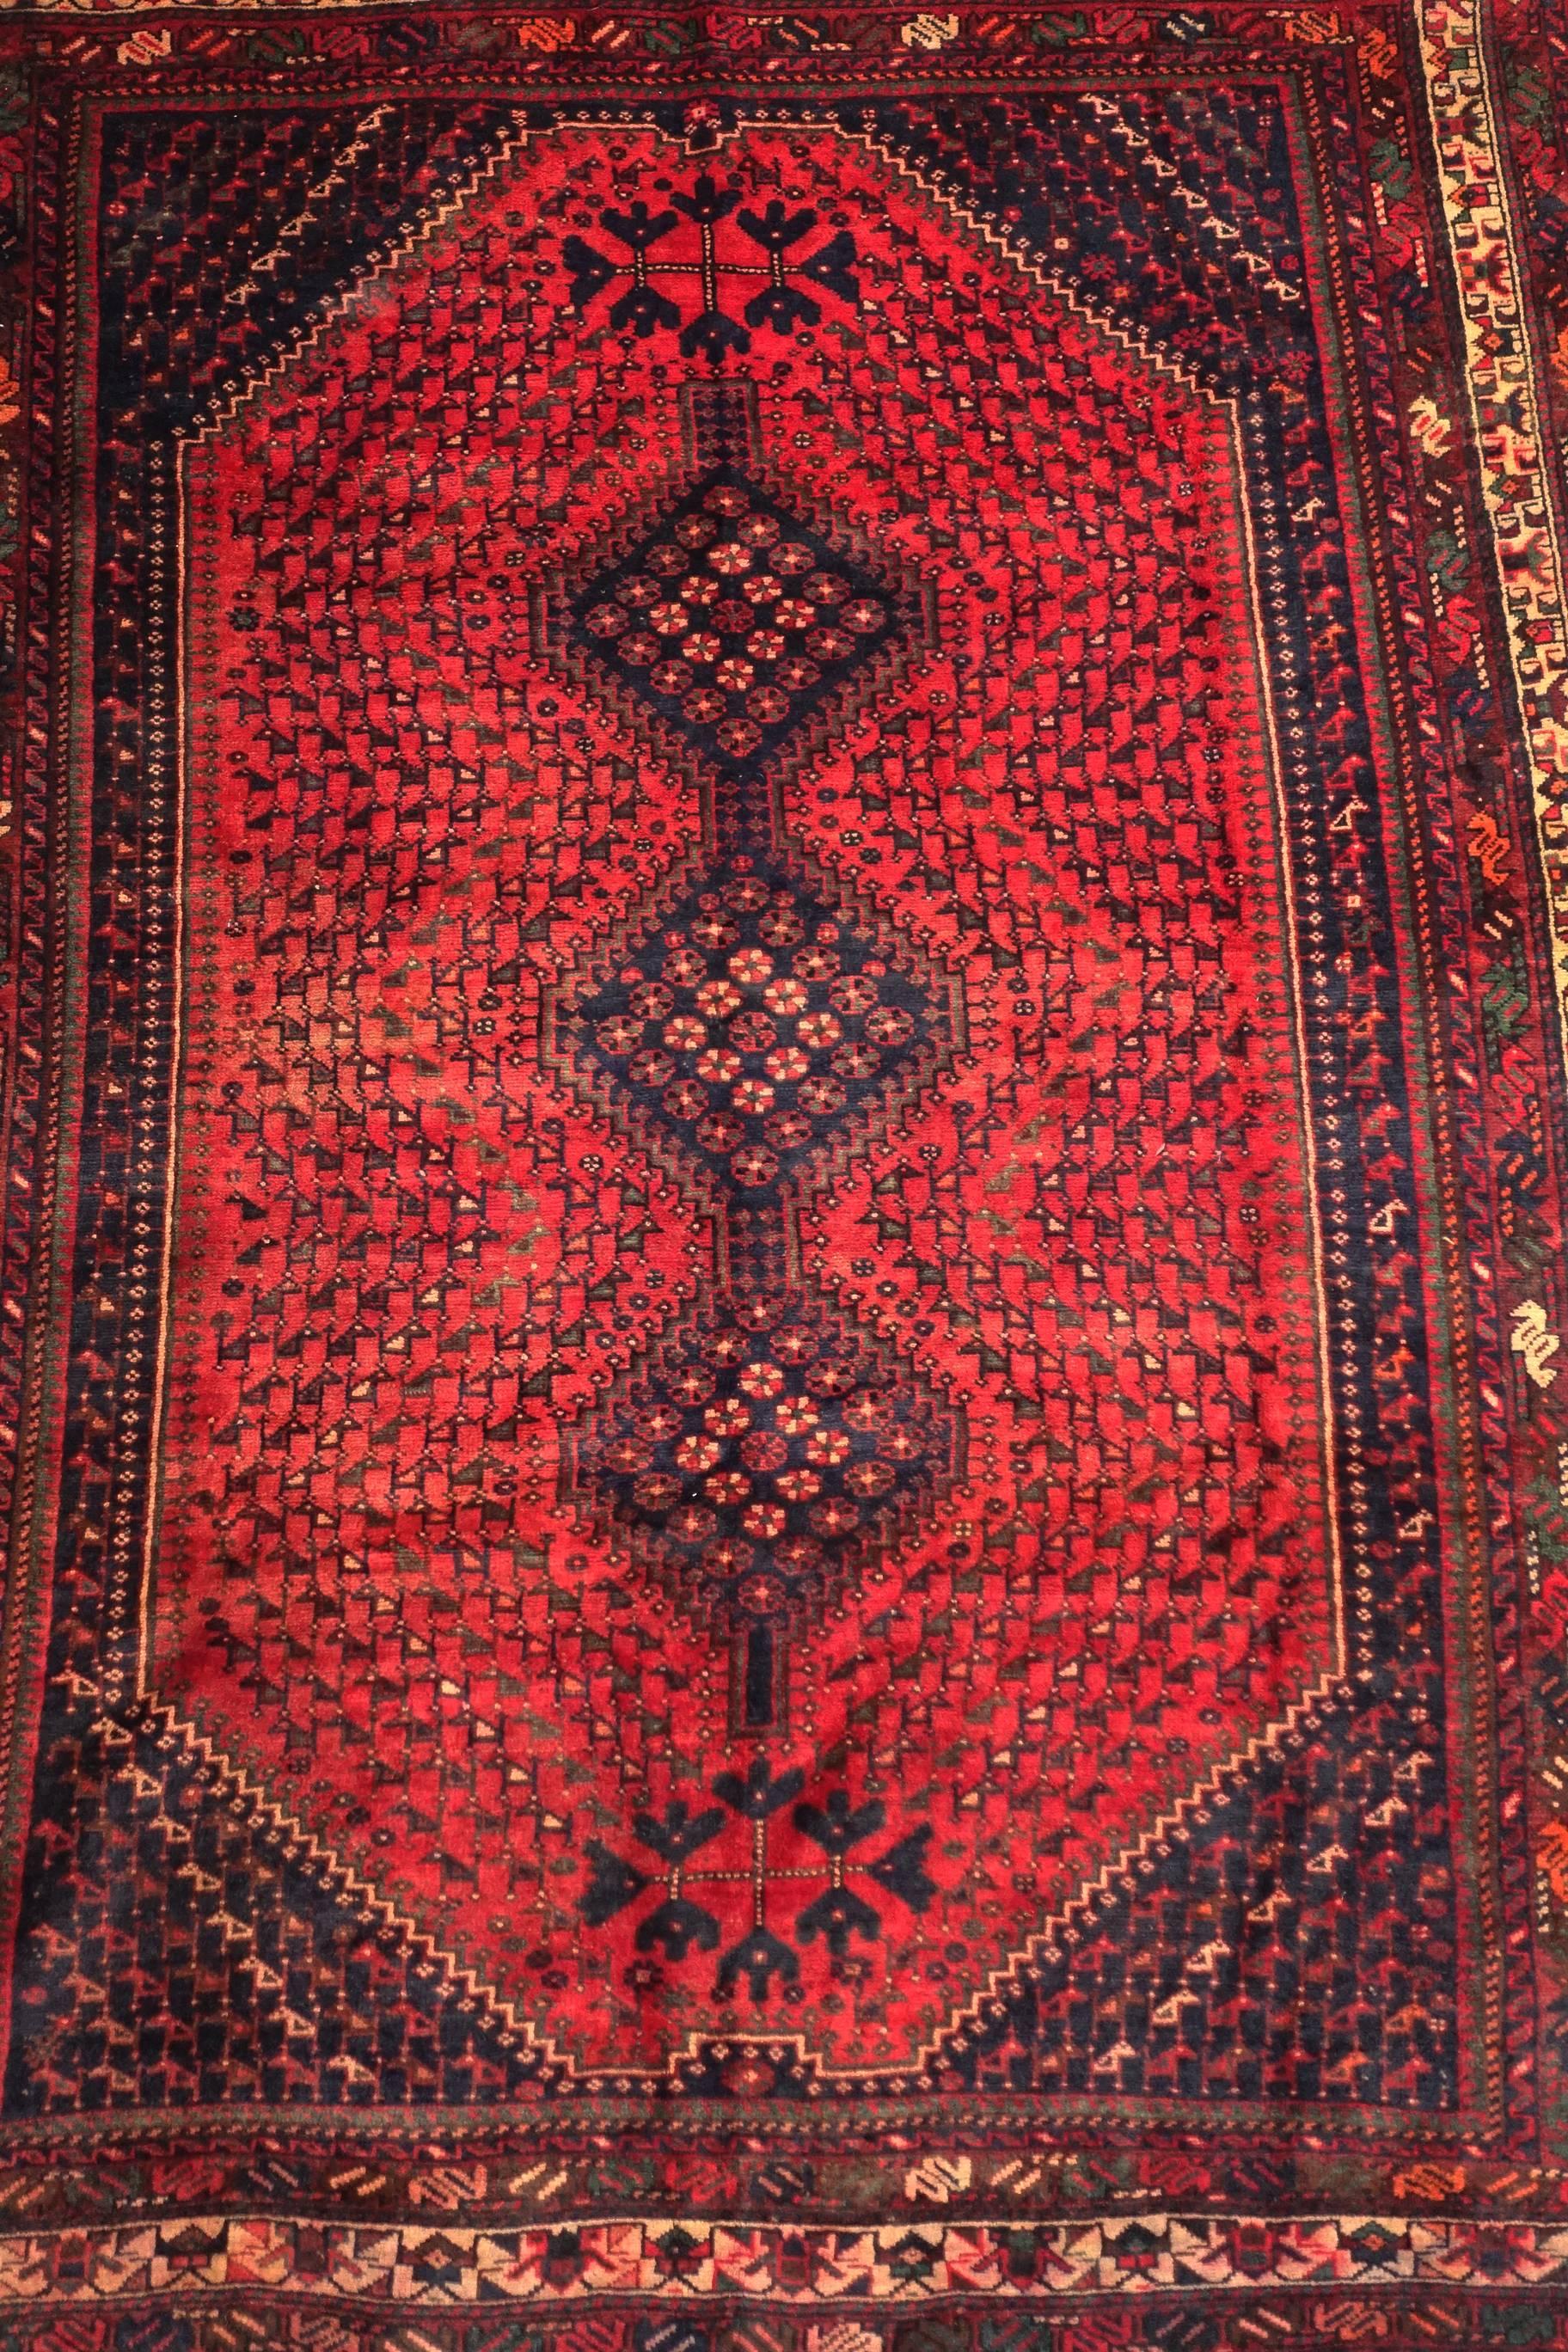 This is a beautifully preserved genuine Qashqai rug produced in the Zagros Mountains in south-western Iran. Apart from the Classic three-serrated medallion lozenge, it features field replete with an array of avian motifs. 
Size: c. 275 x 203cm or